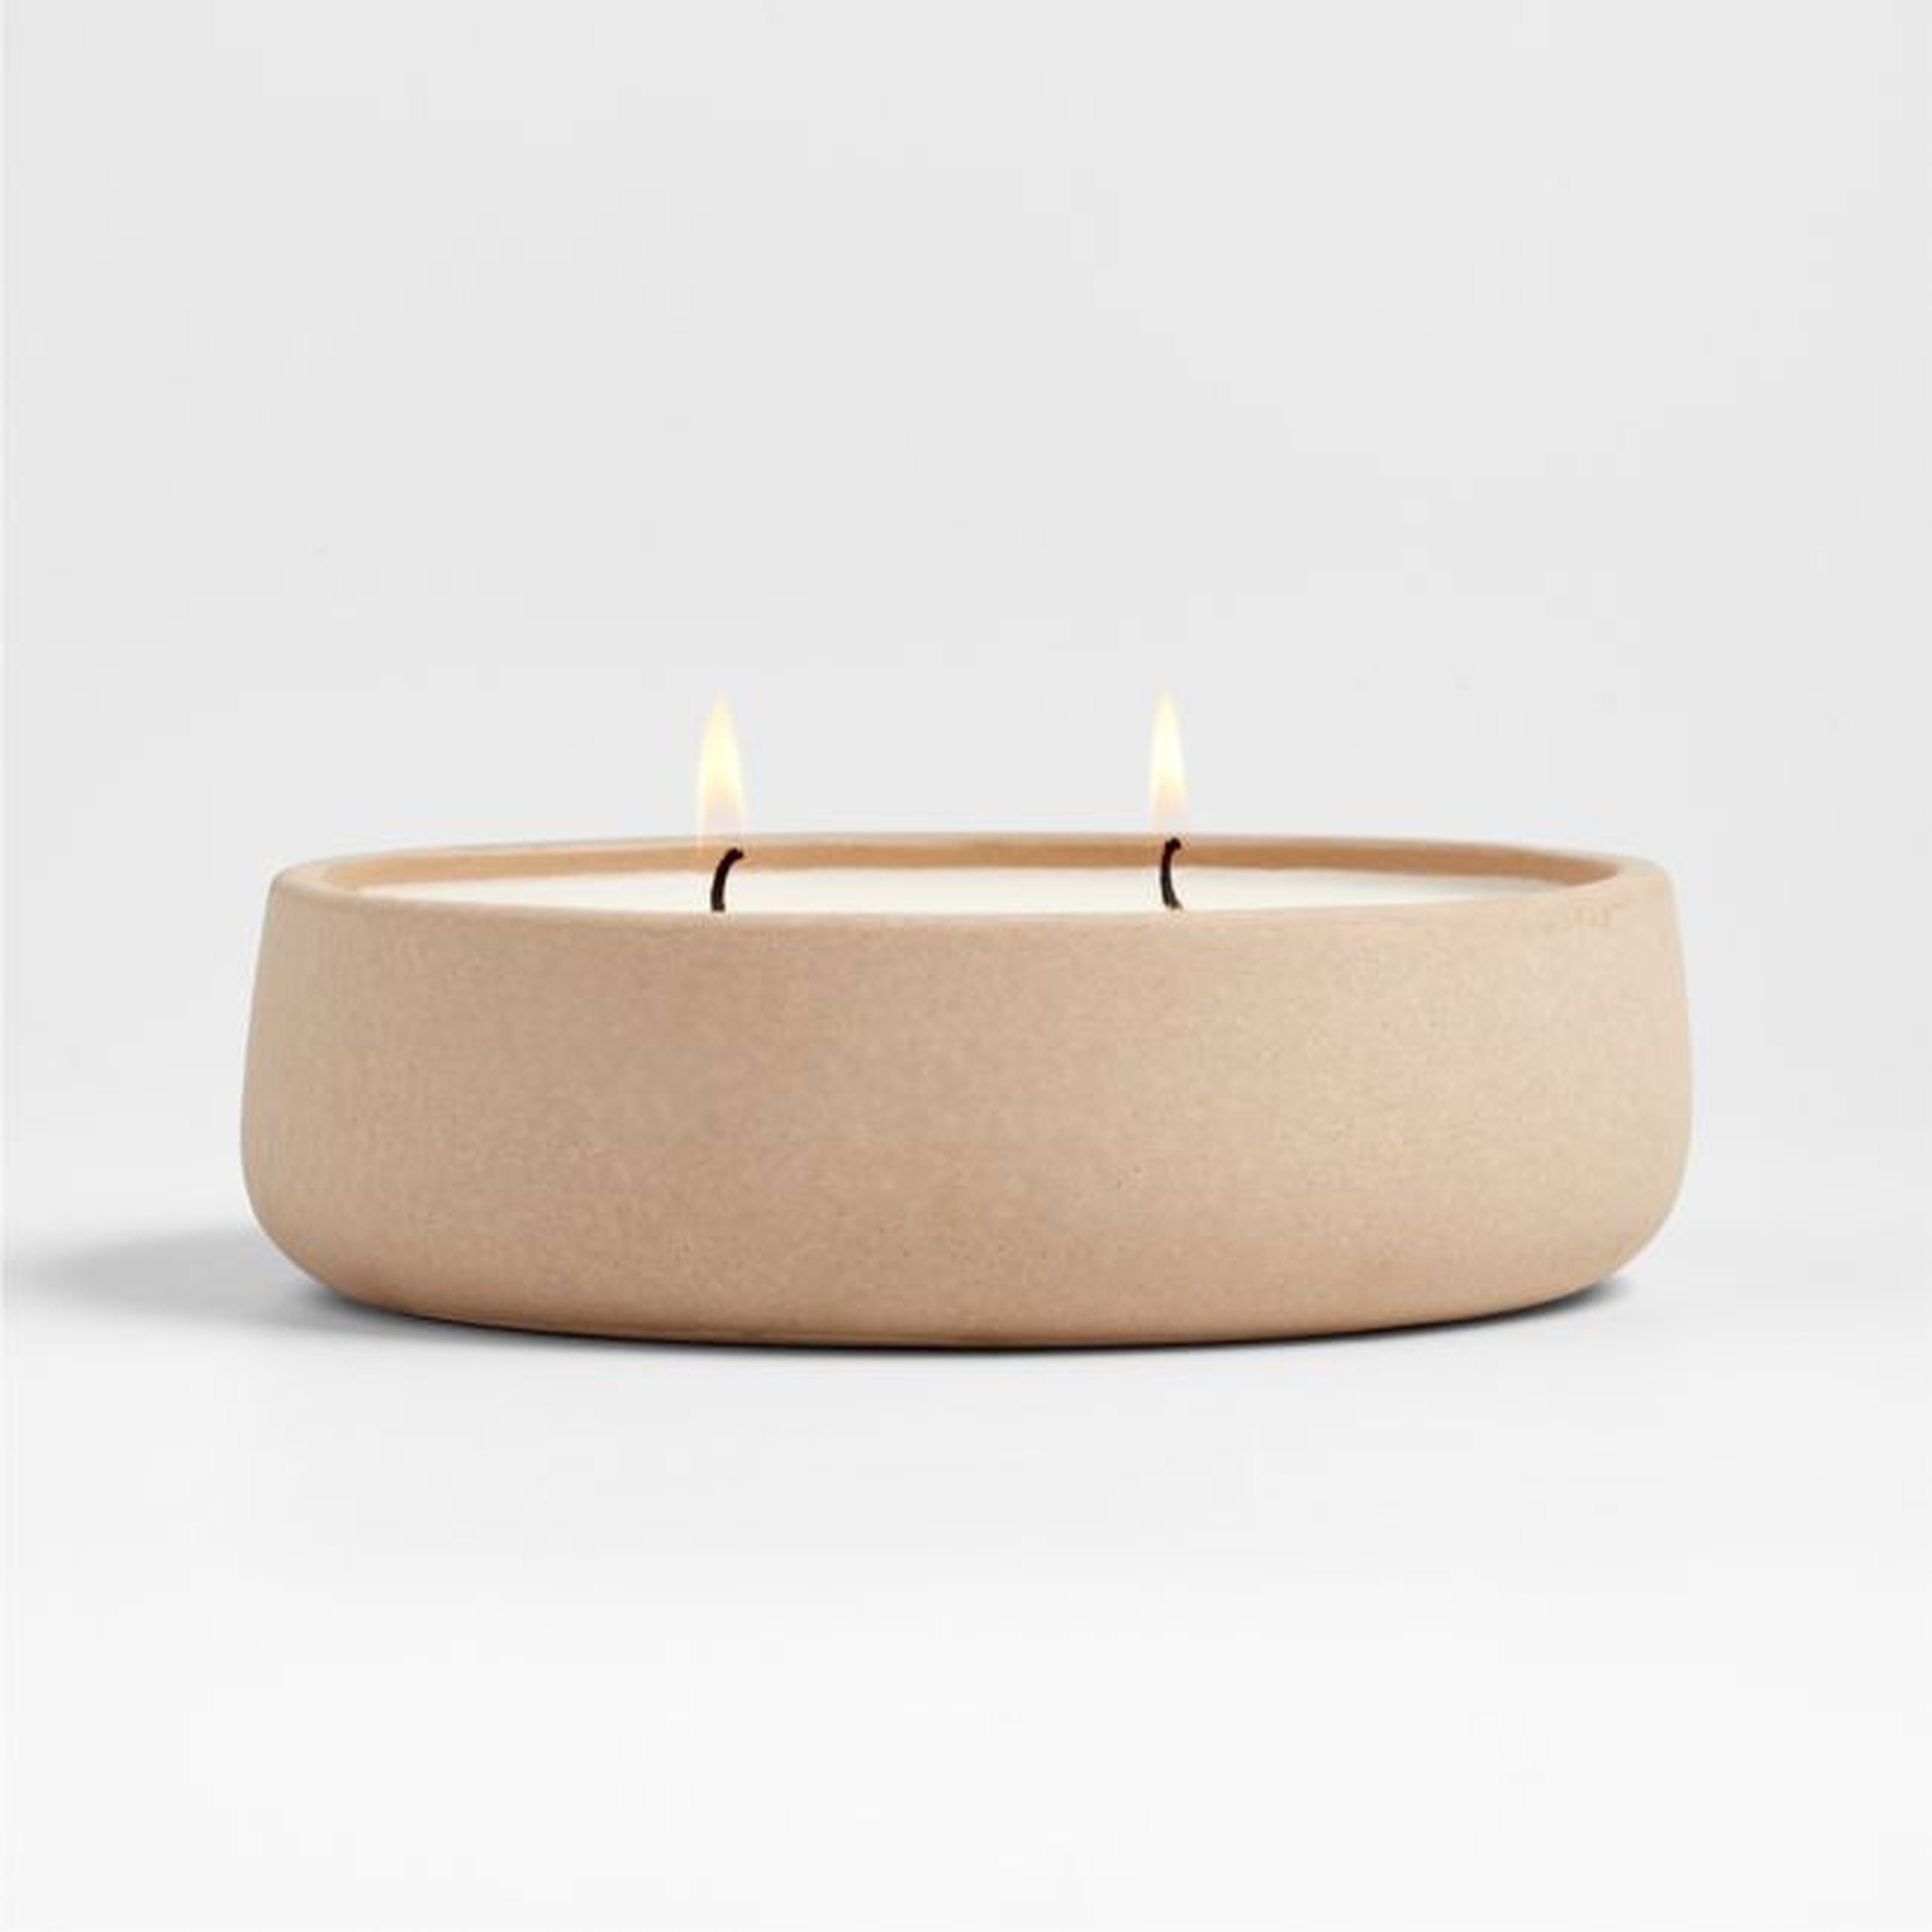 Saabira Low Citronella Candle - Crate and Barrel